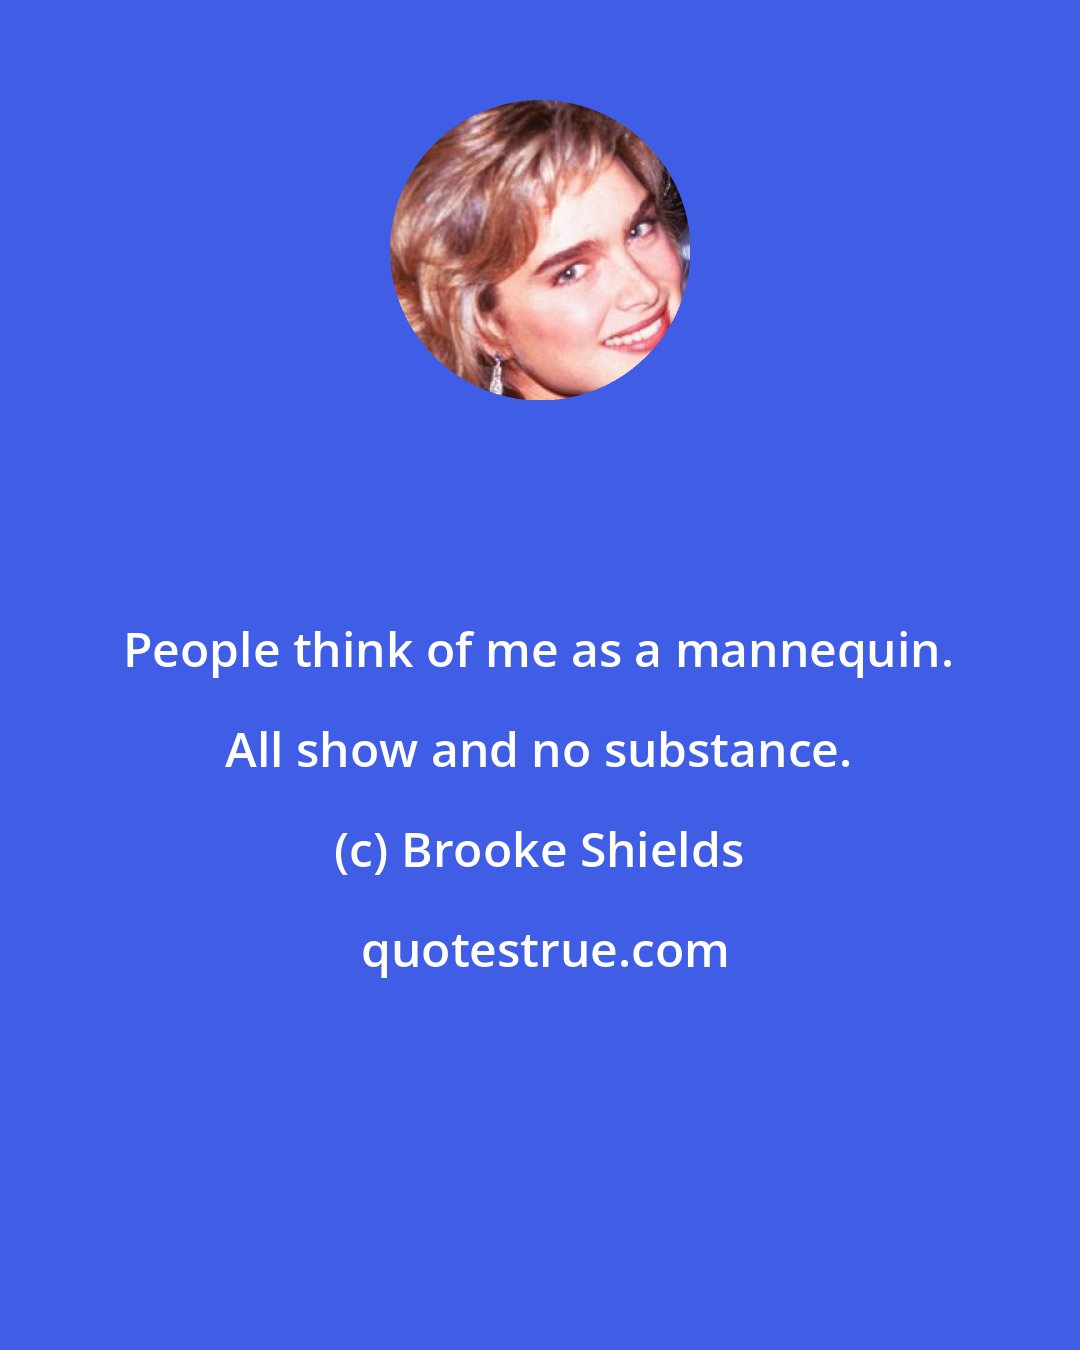 Brooke Shields: People think of me as a mannequin. All show and no substance.